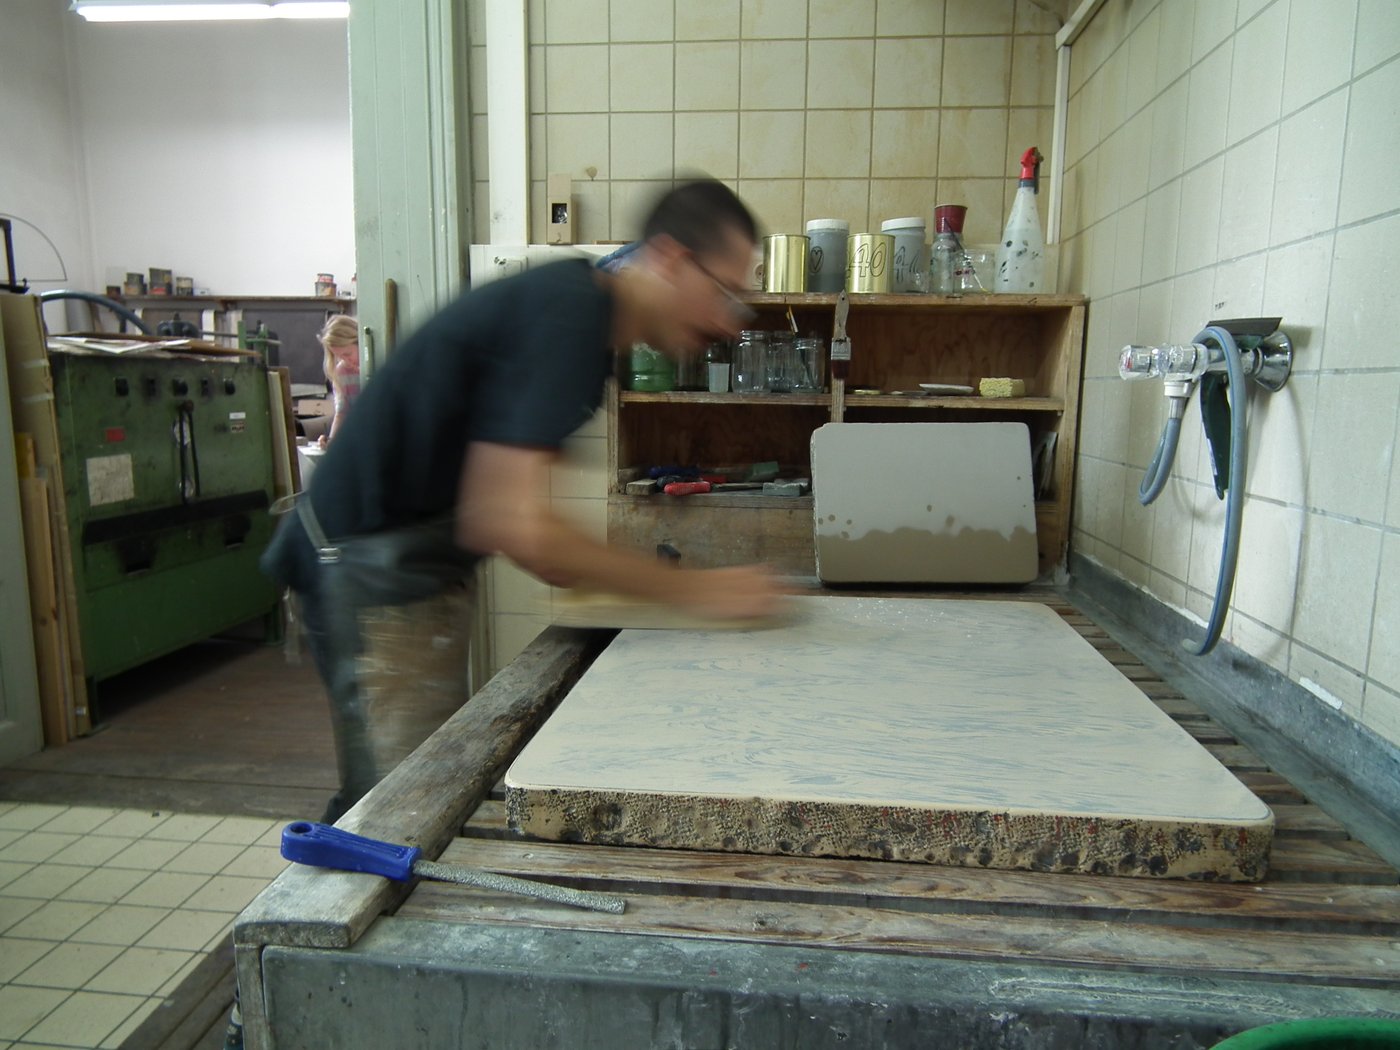 One person works the lithographic stone